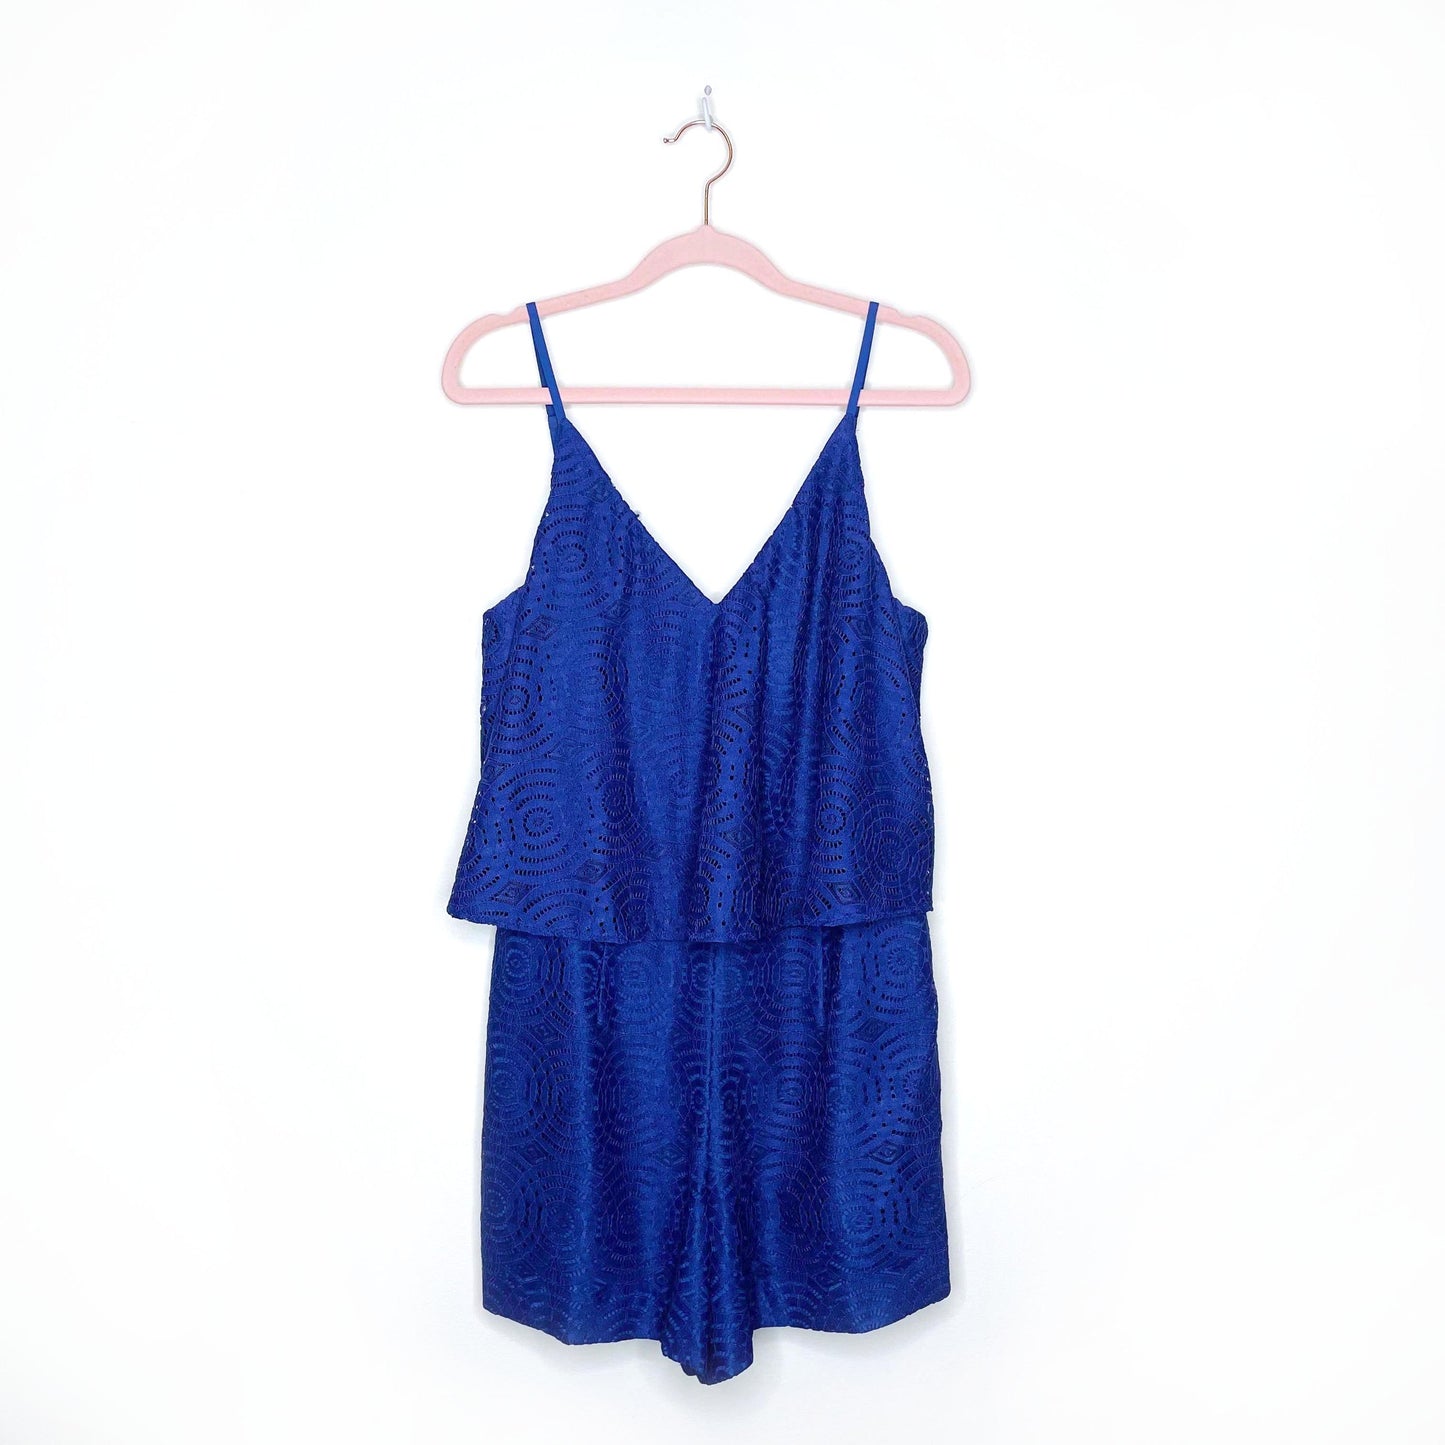 lilly pulitzer blue lace caia romper - size 8